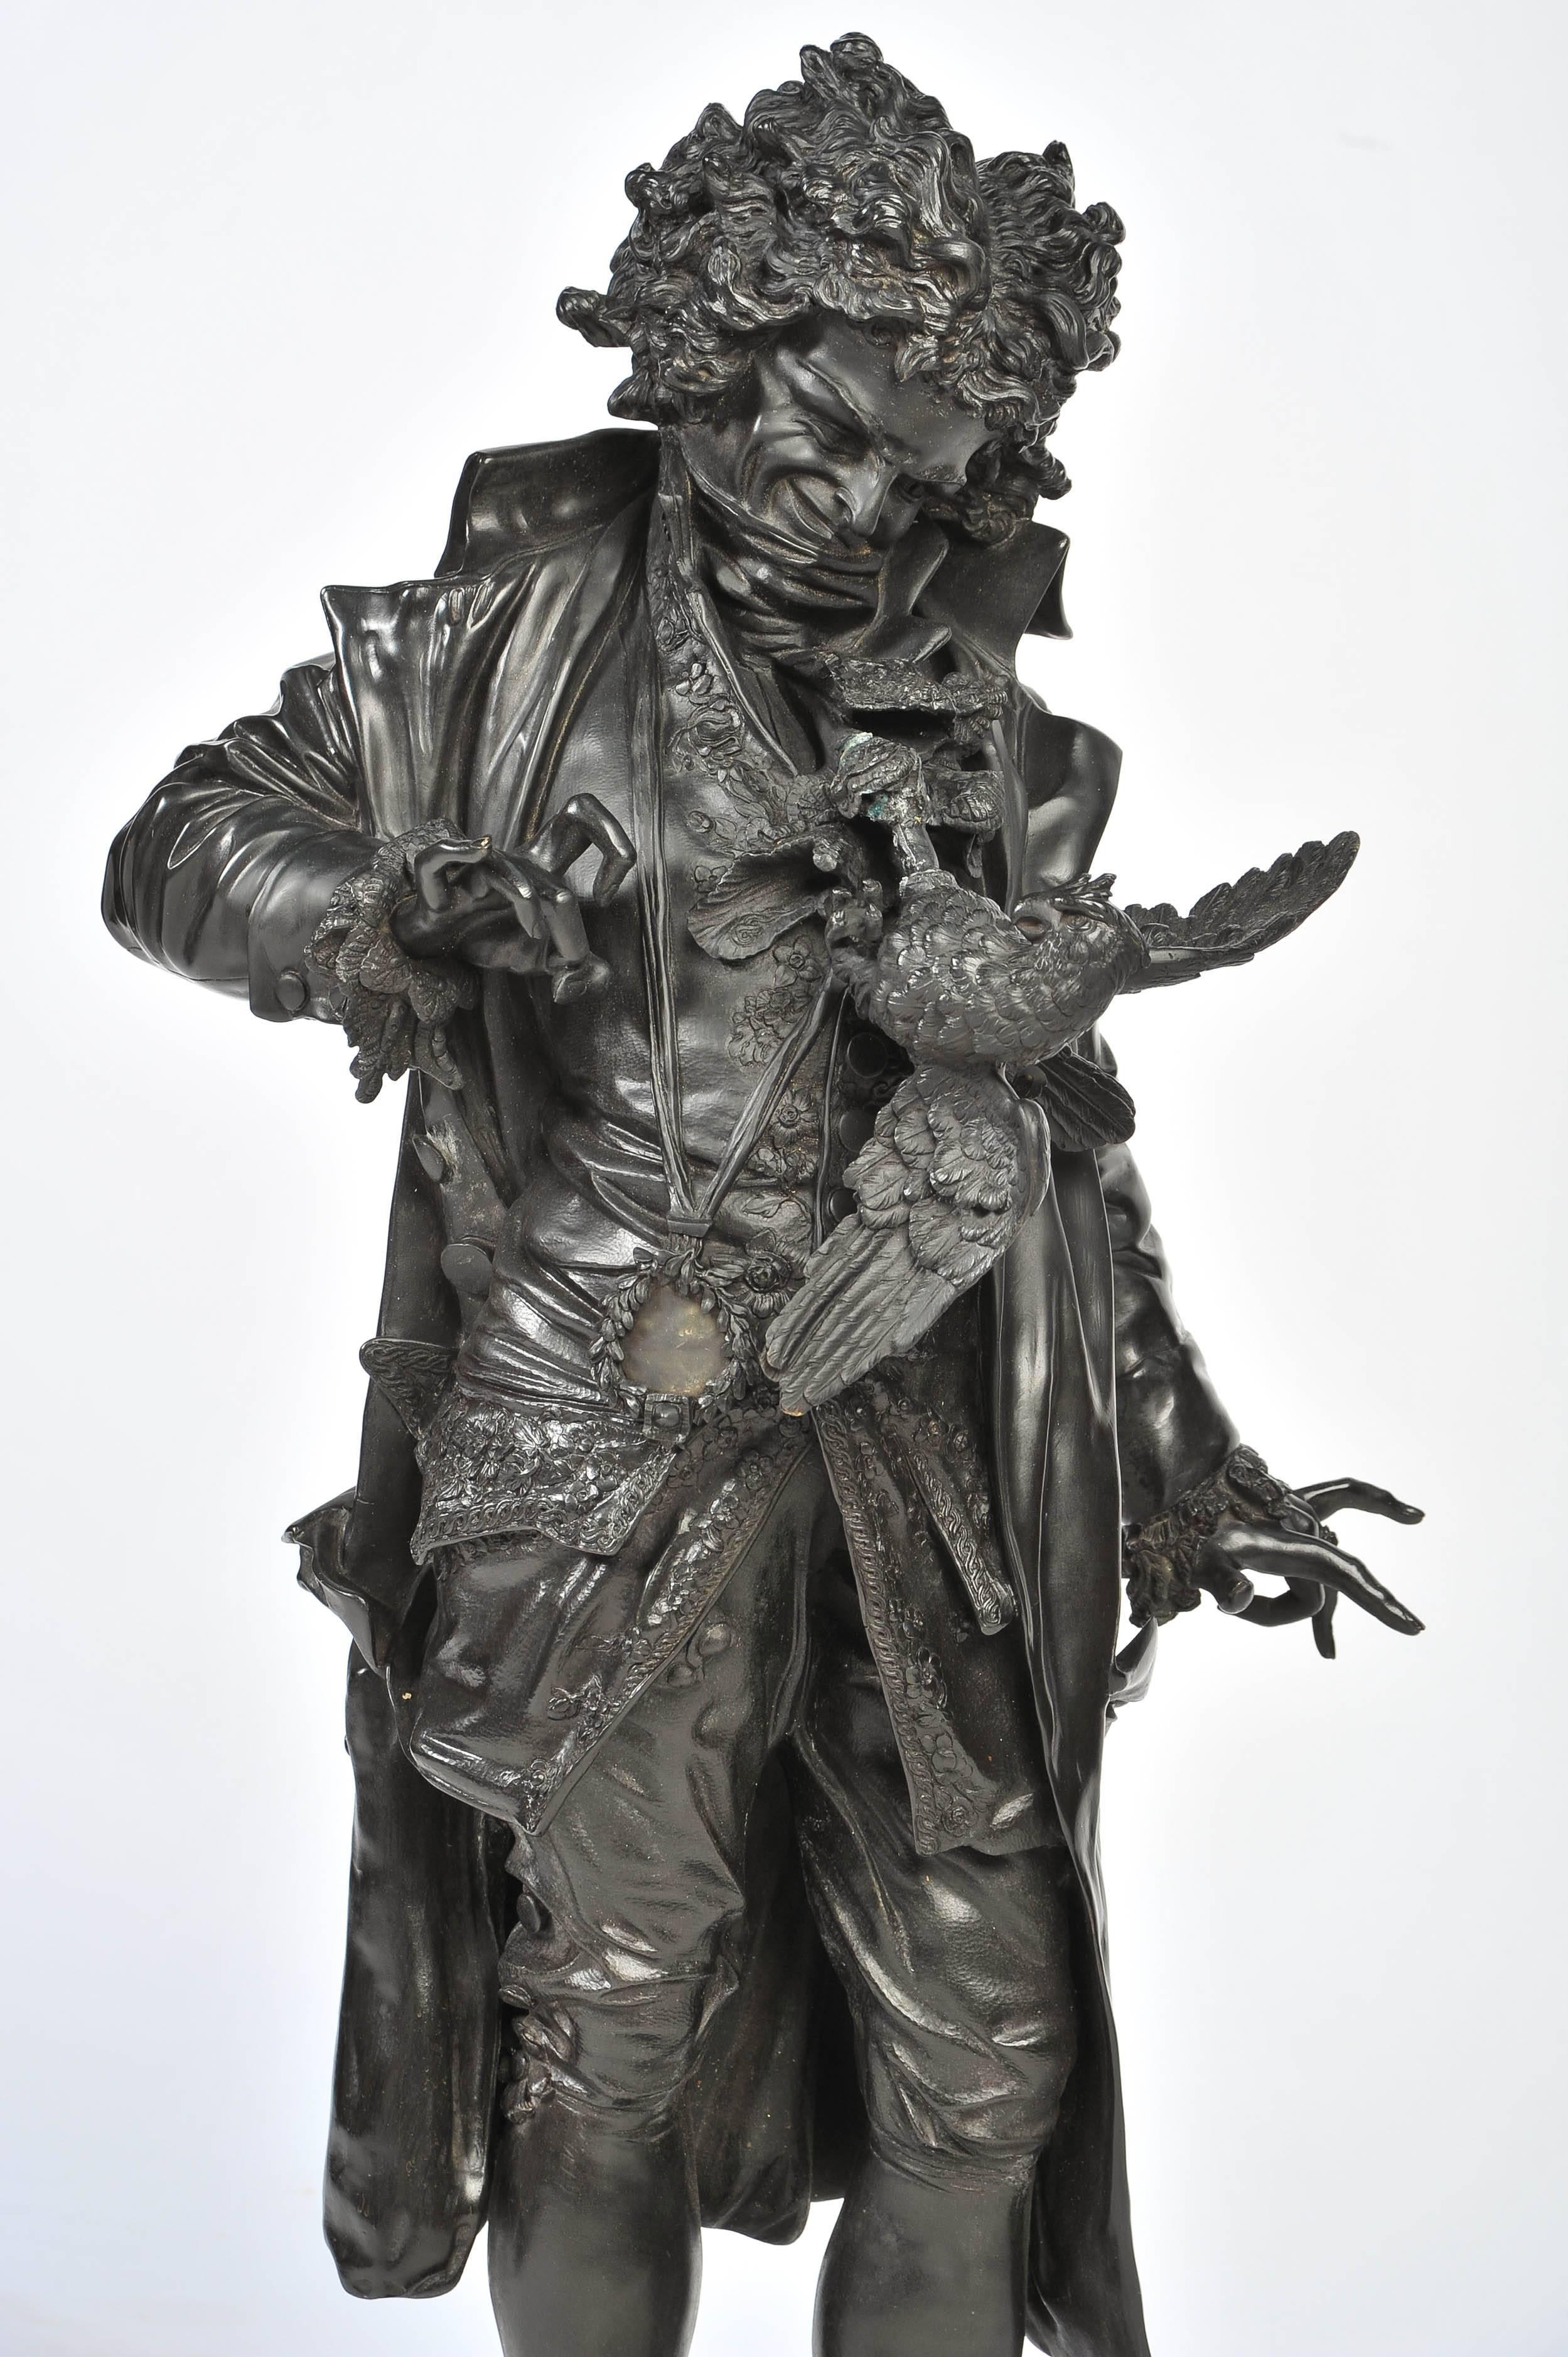 Cast Bronze by Pandiani of Beethoven